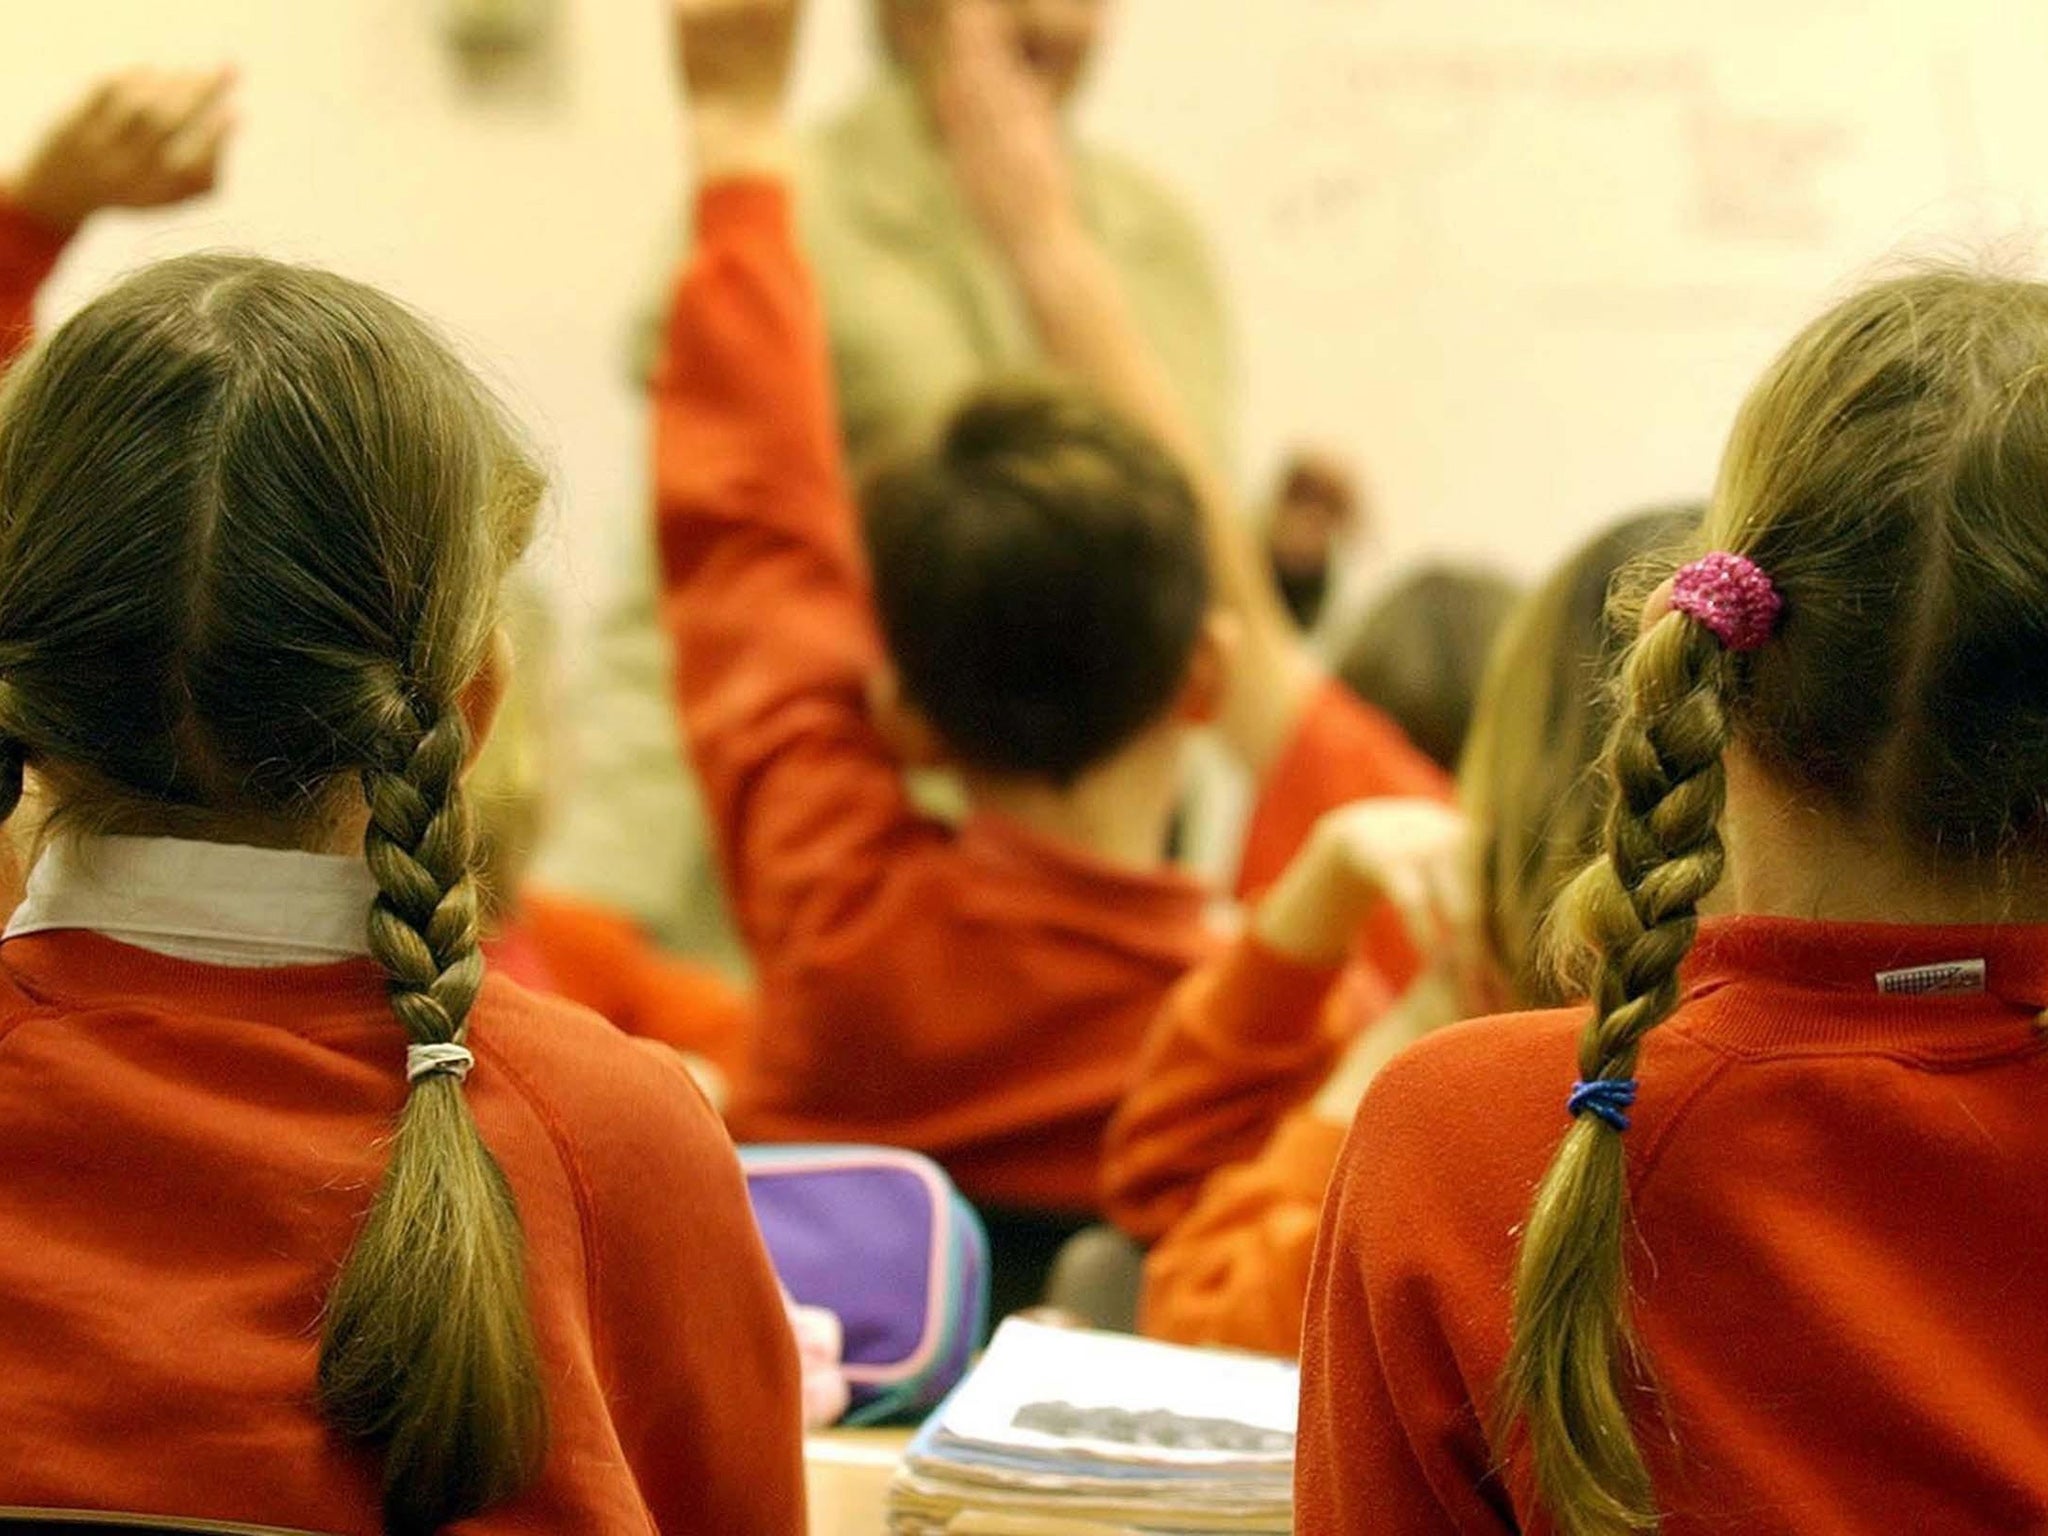 Thousands of children across the country are due to sit the national tests this month